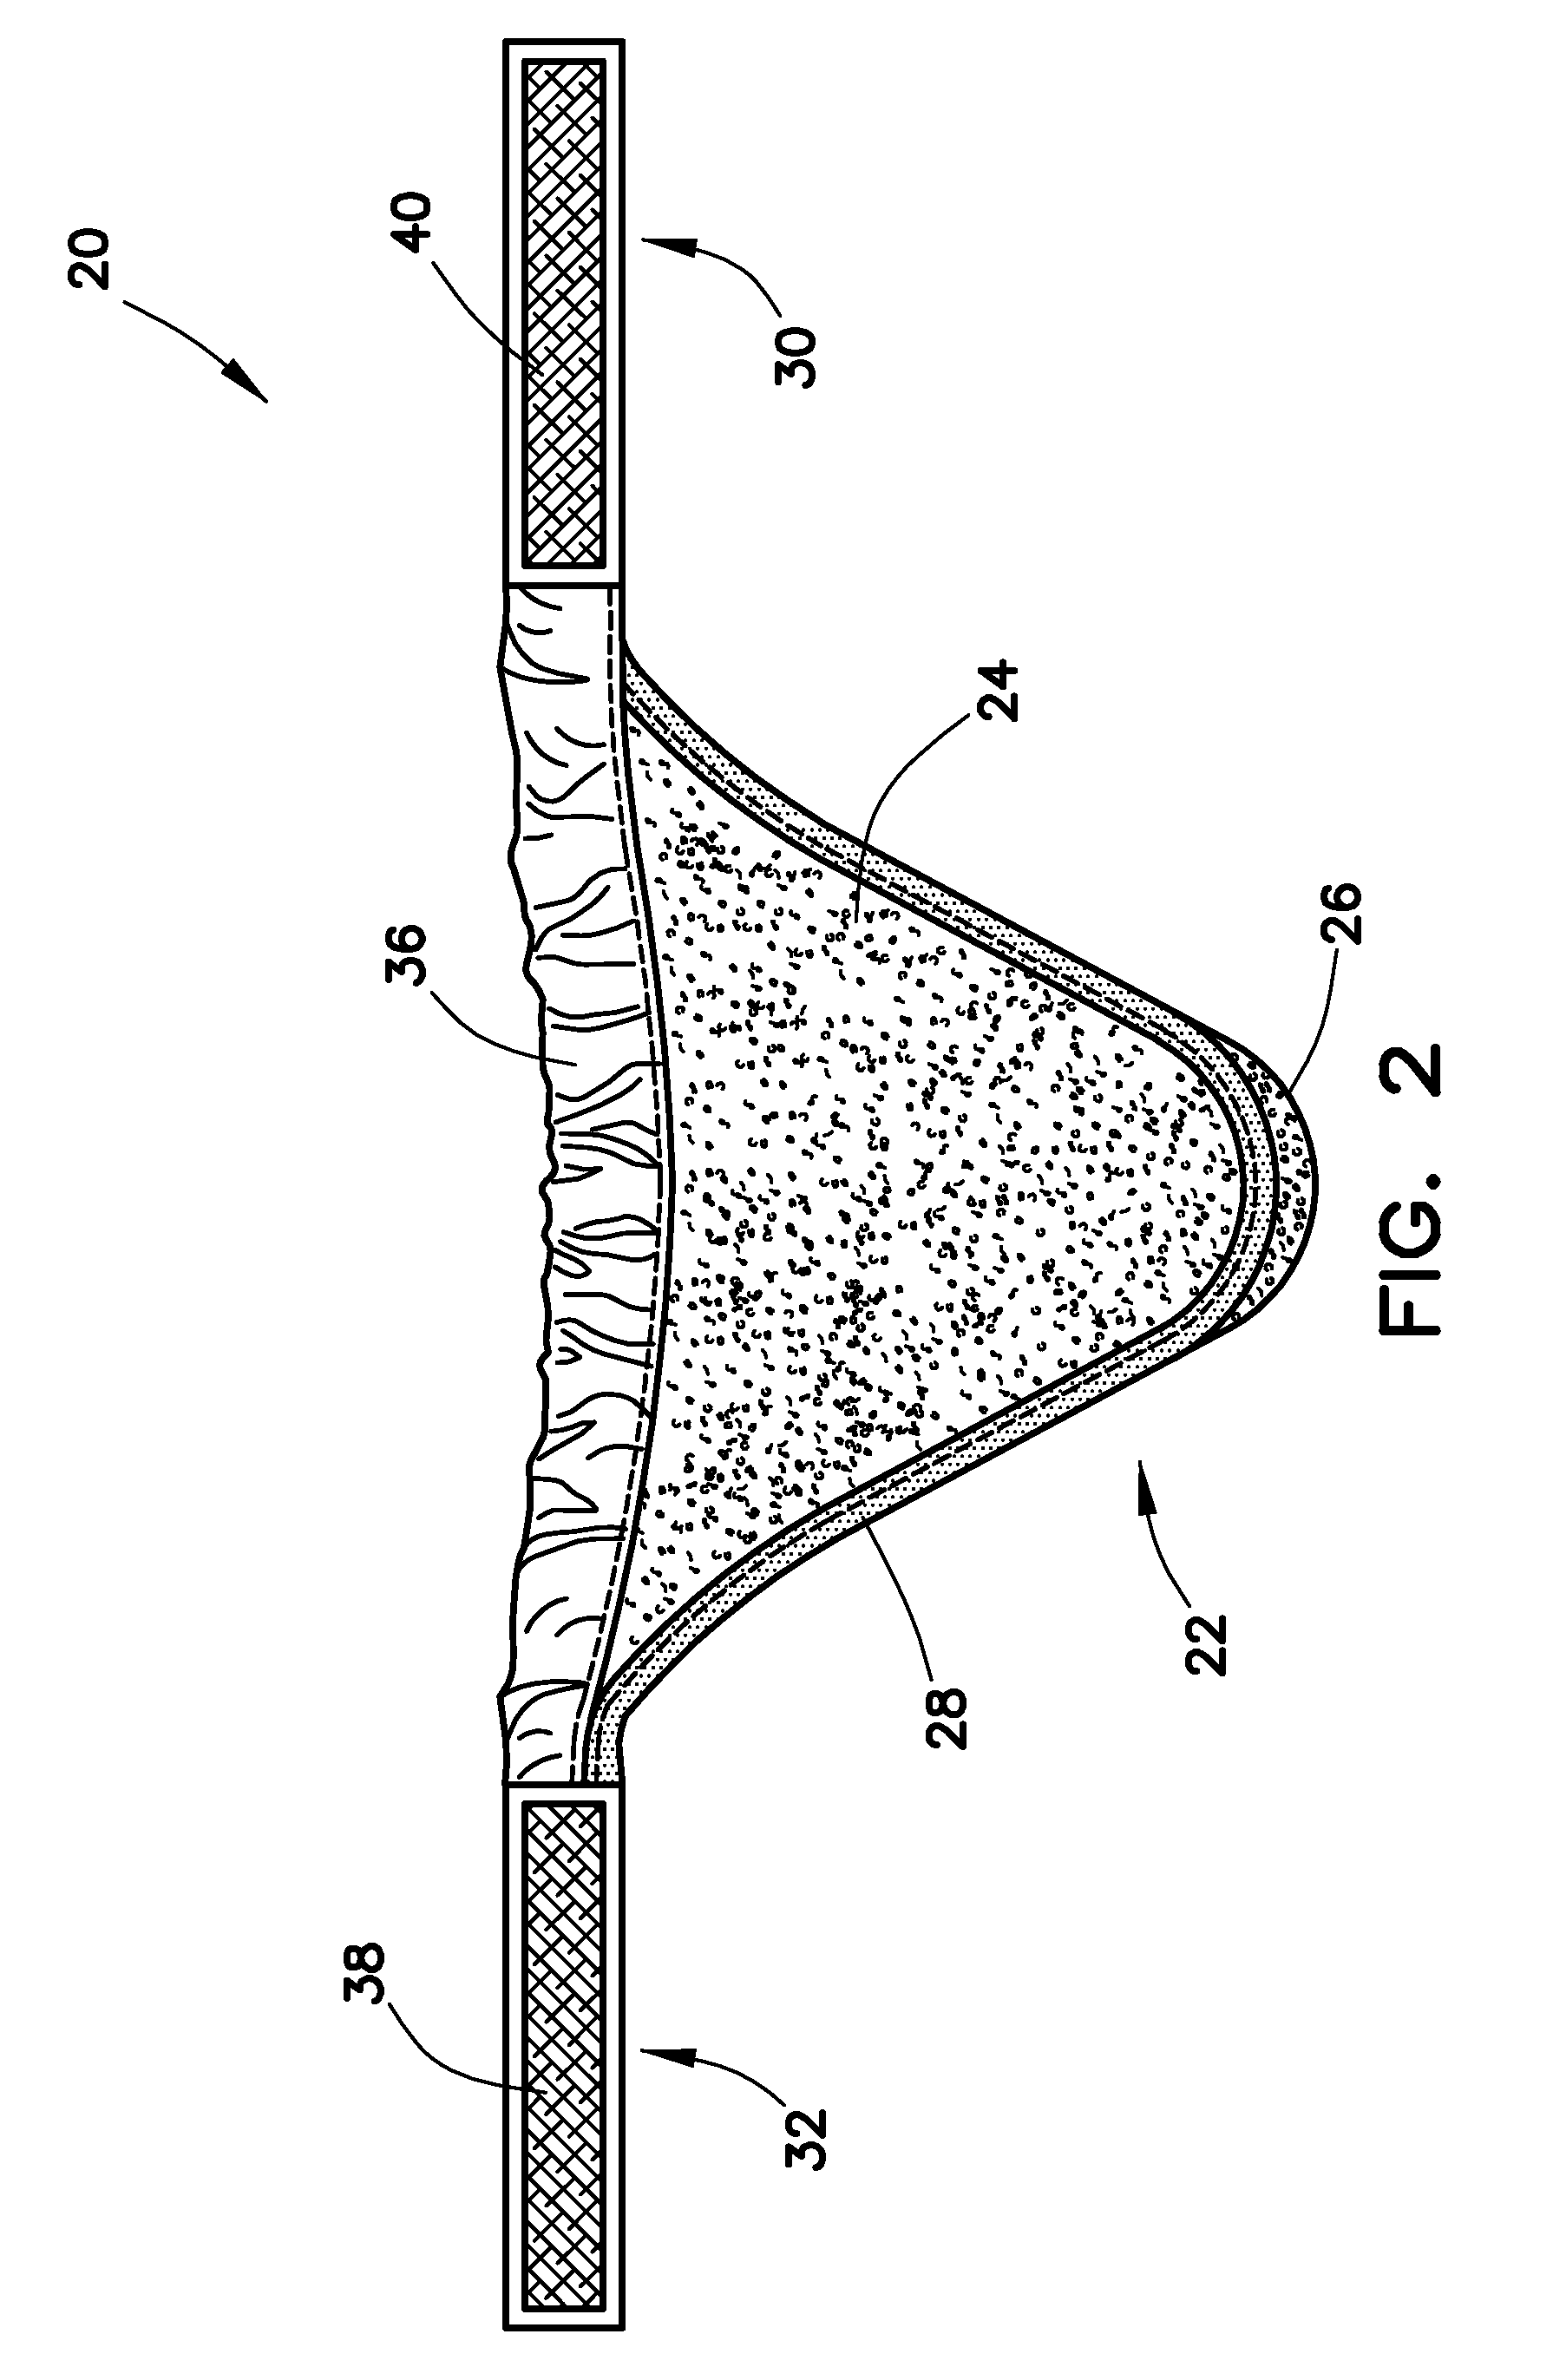 Eco-friendly urine guard for shielding and/or receiving discharging urine from an infant